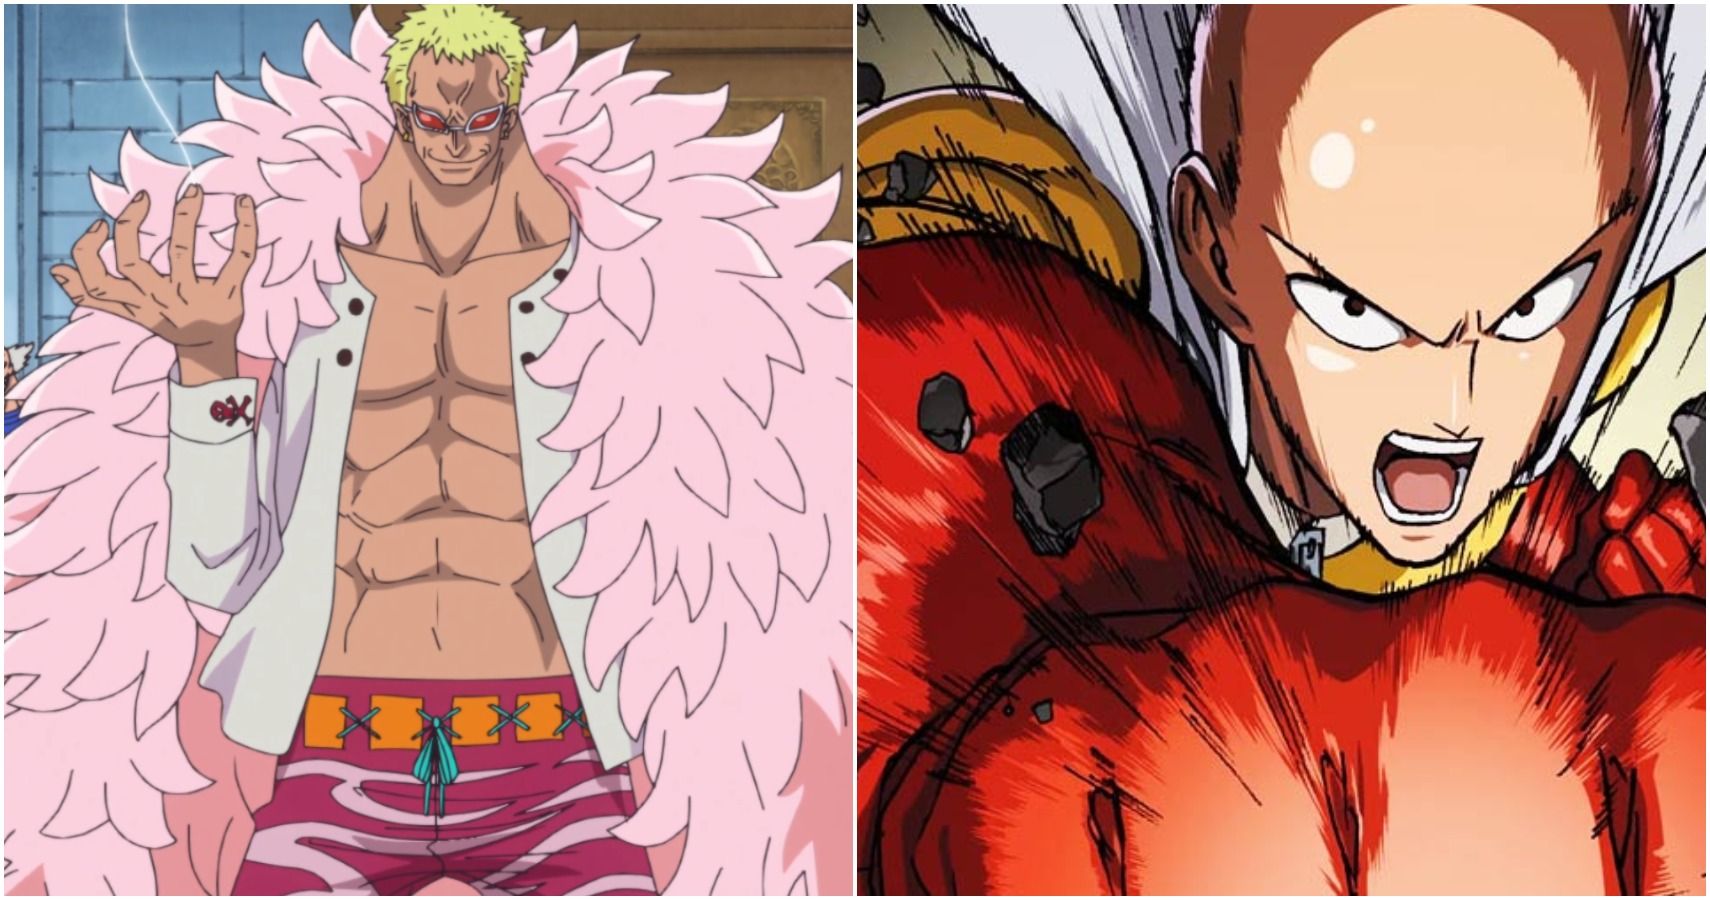 10 Anime Characters Who Could Defeat One Piece's Katakuri